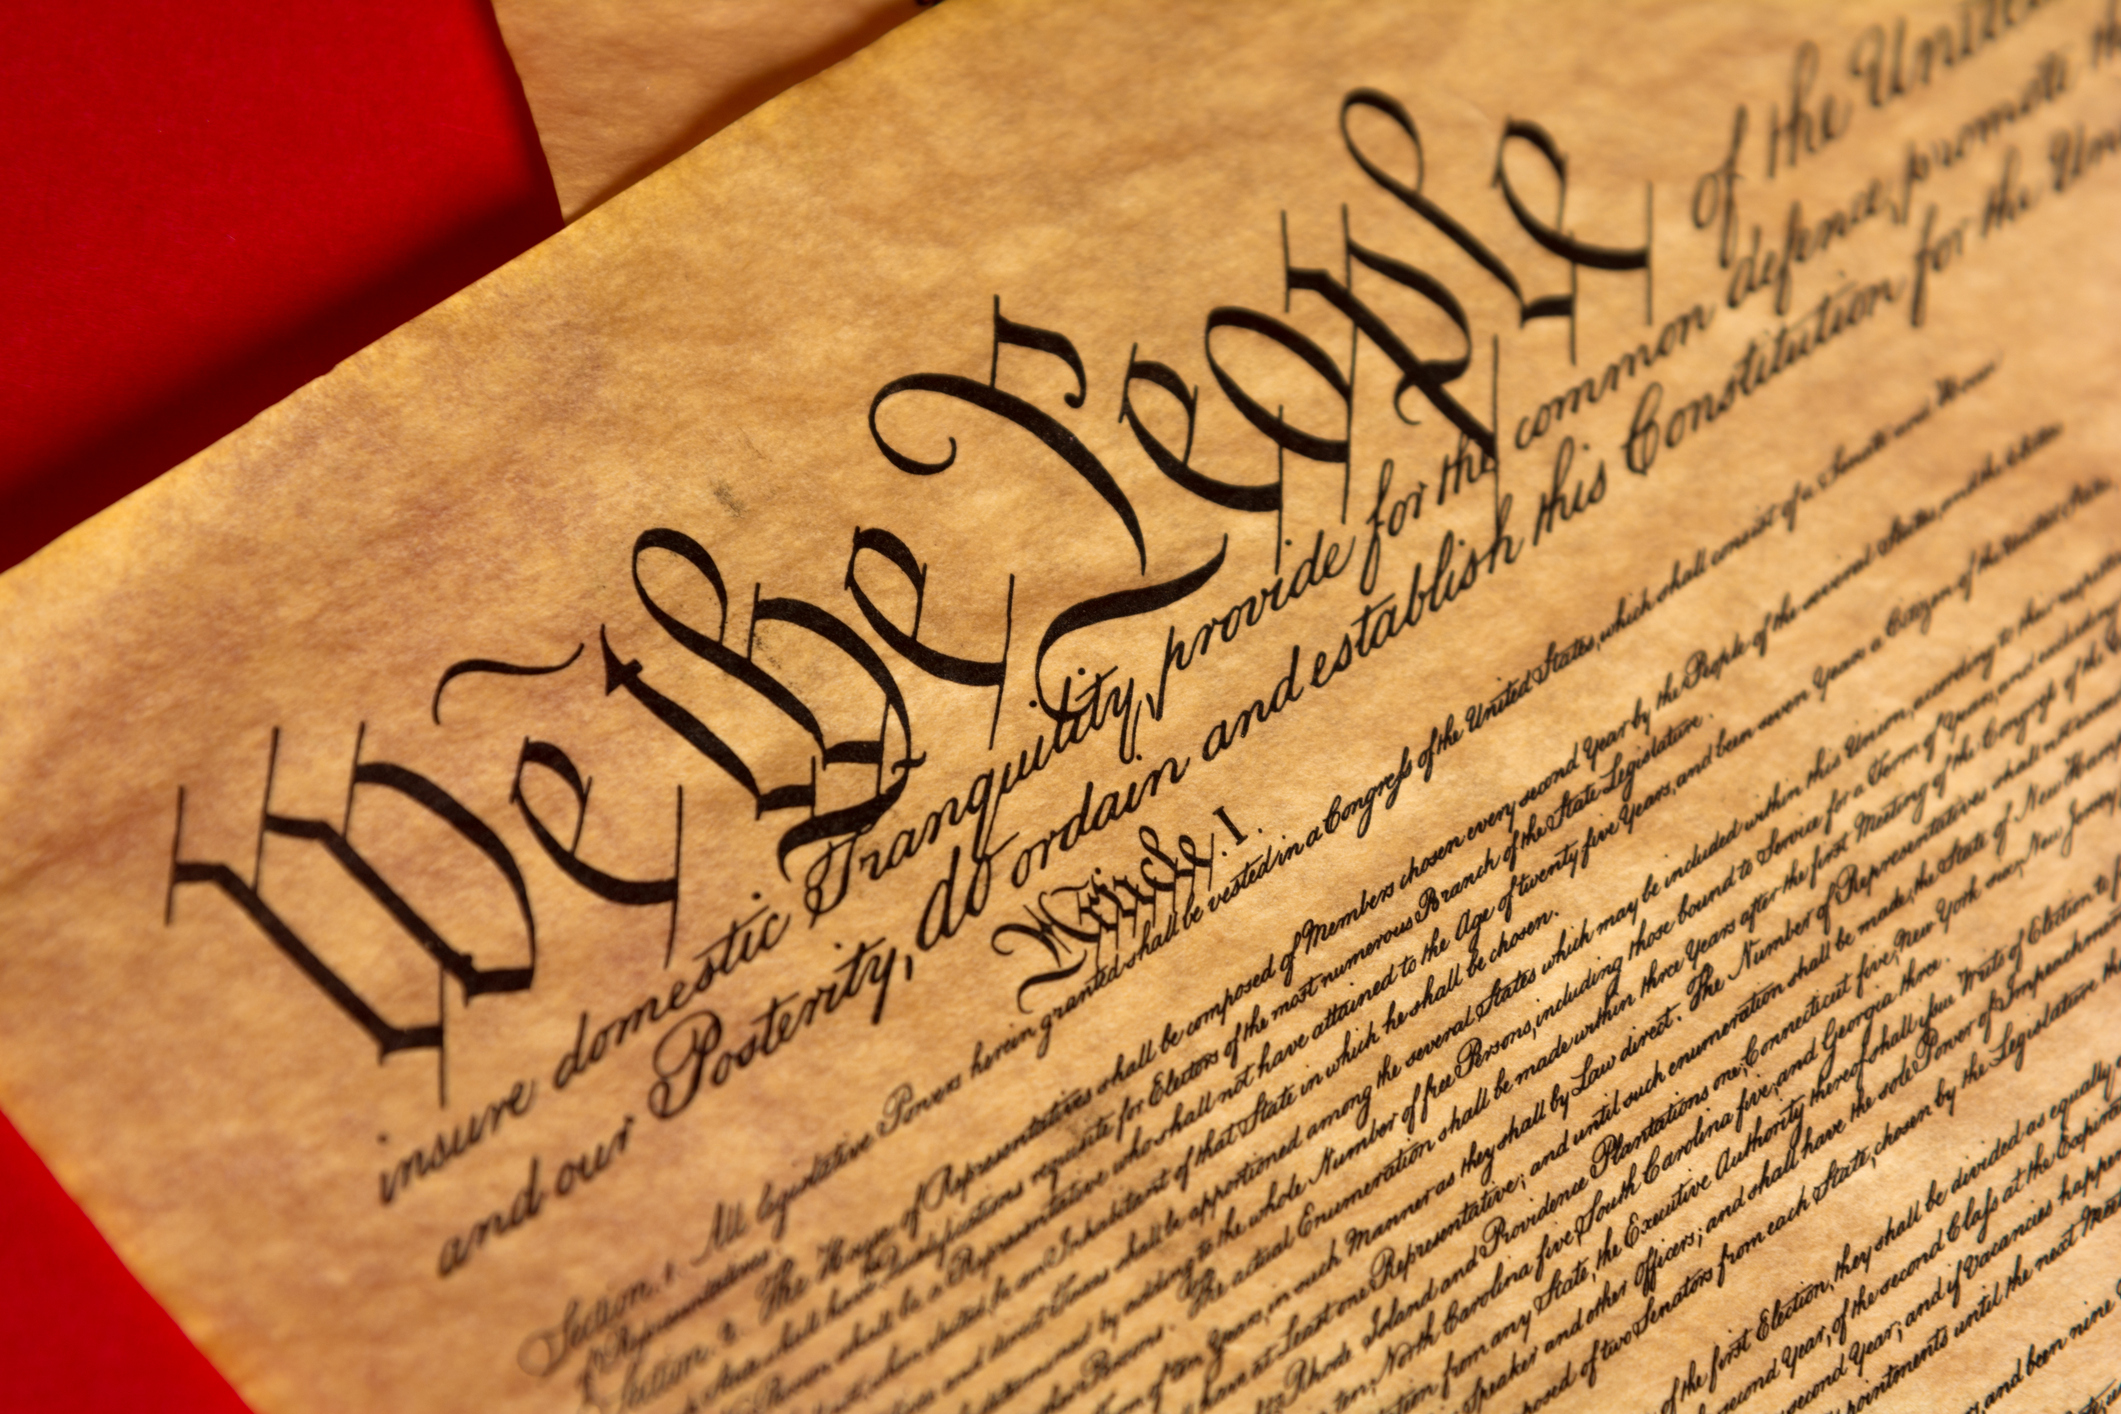 "we the people" visual of the United States Constitution